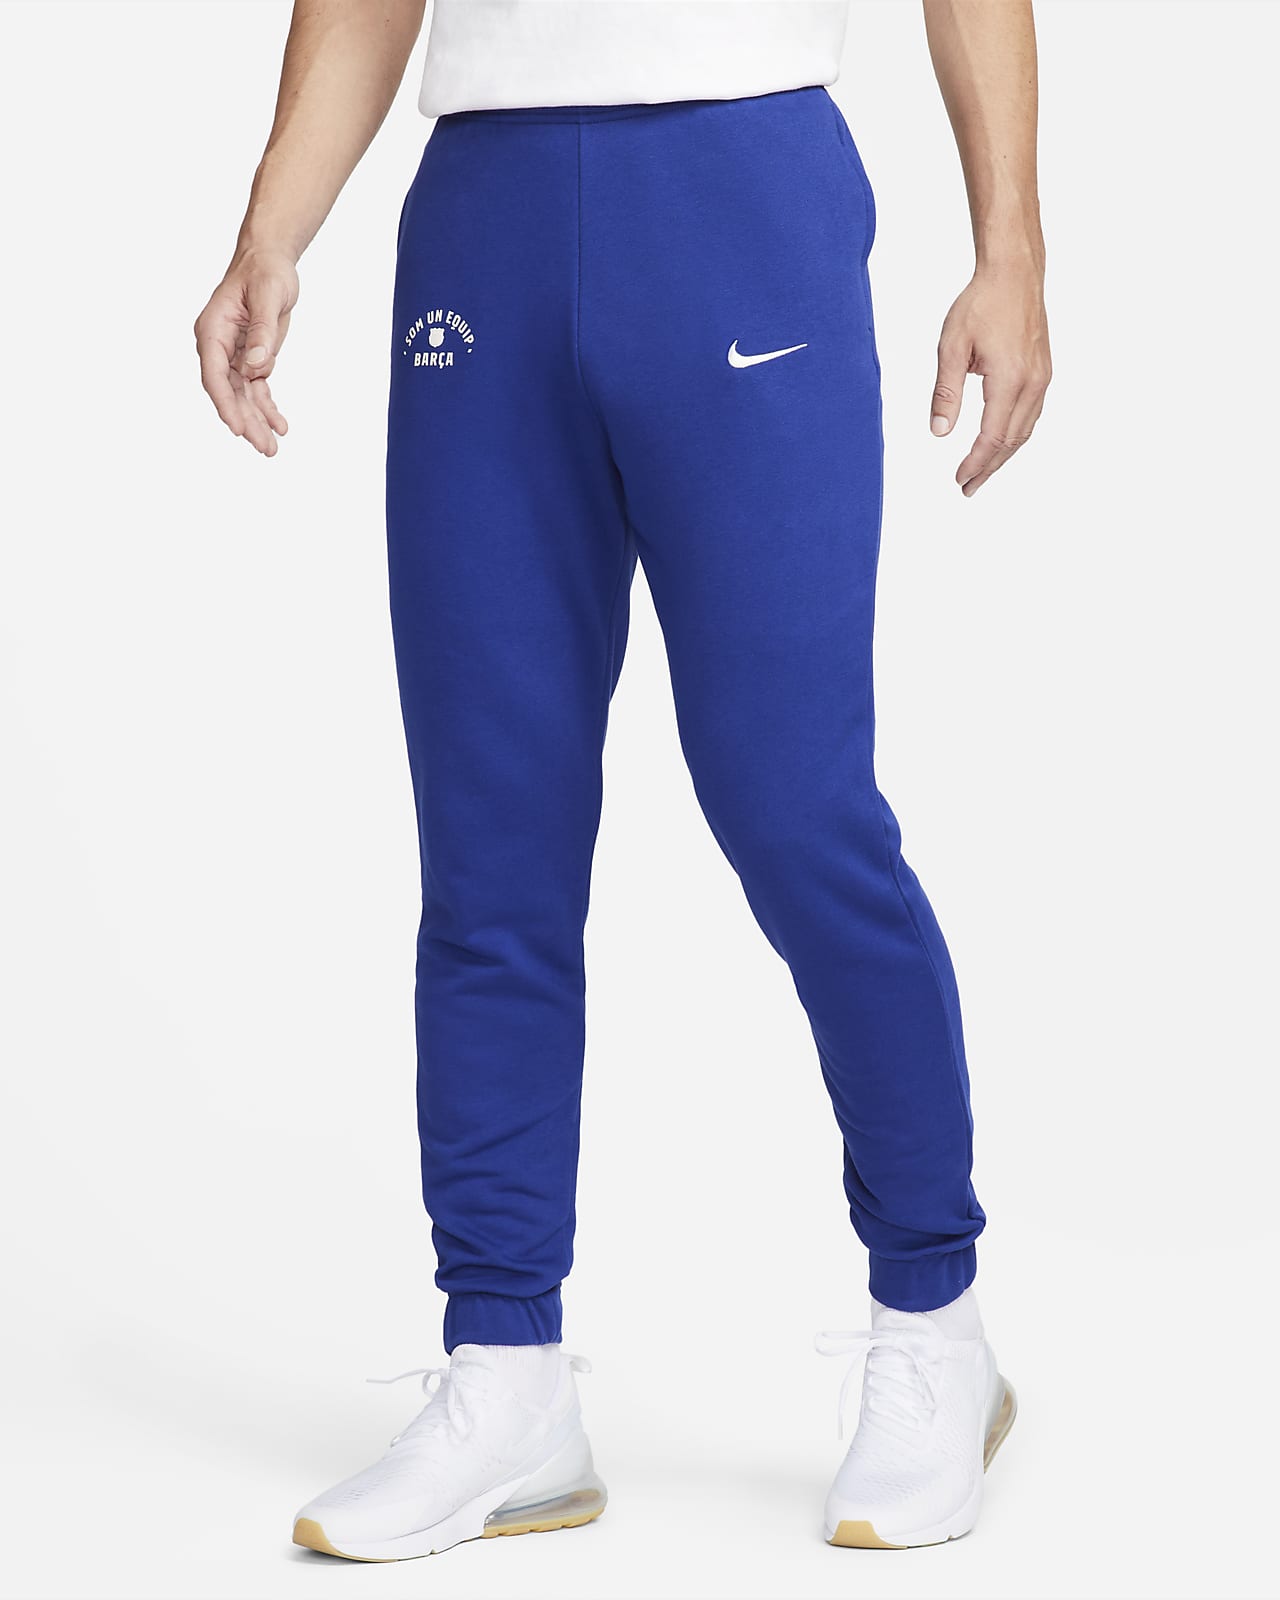 FC Barcelona Men's Nike French Terry Pants